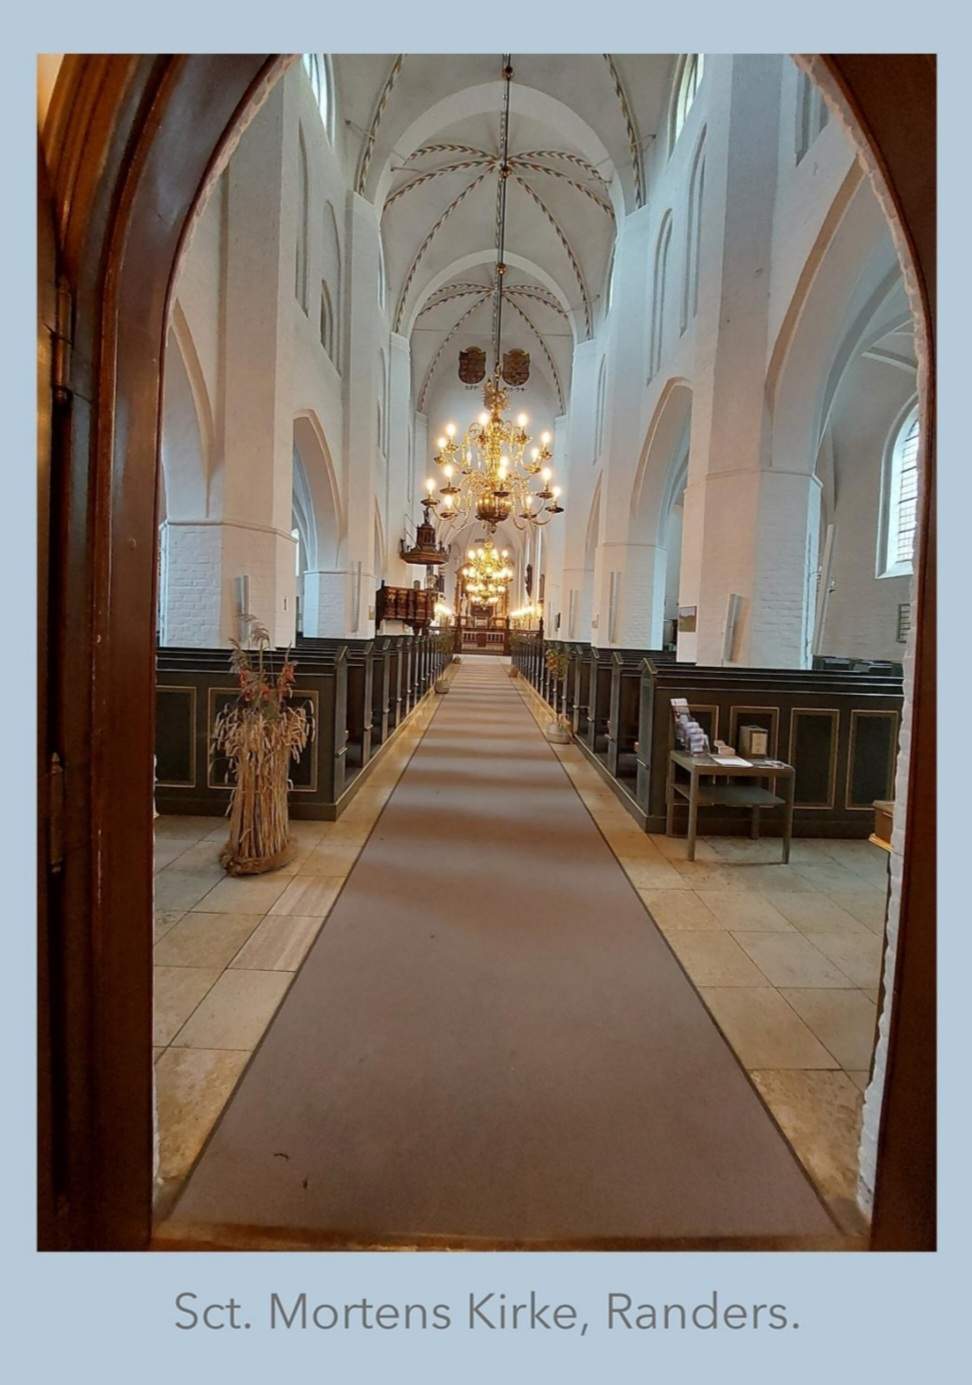 The entrance of Sct. Mortens Church.